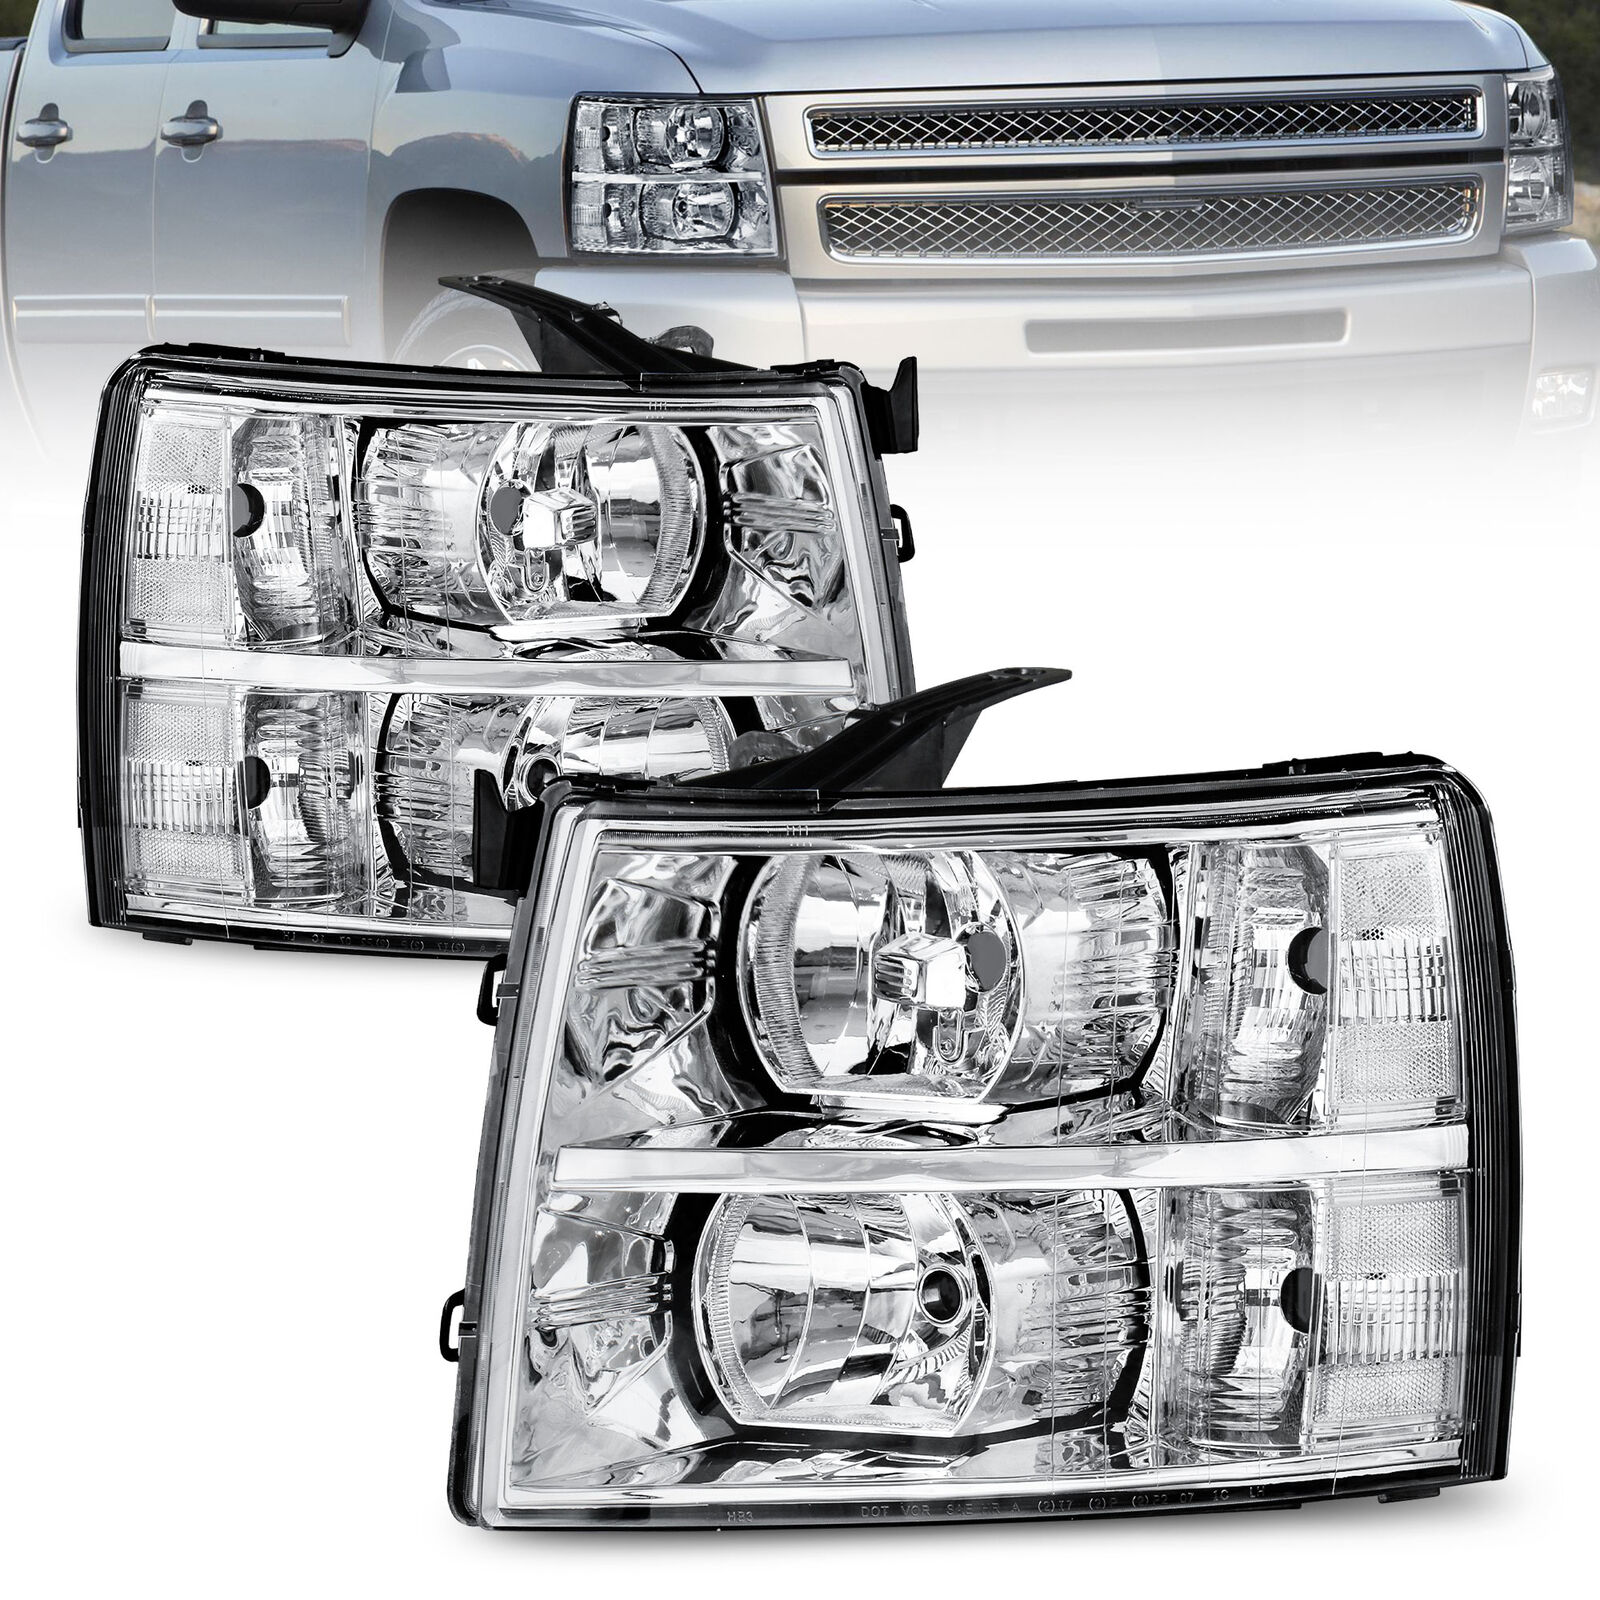 Pair Headlight Assembly w/ Clear Lens For 07-13 Chevy Silverado 1500 2500 3500